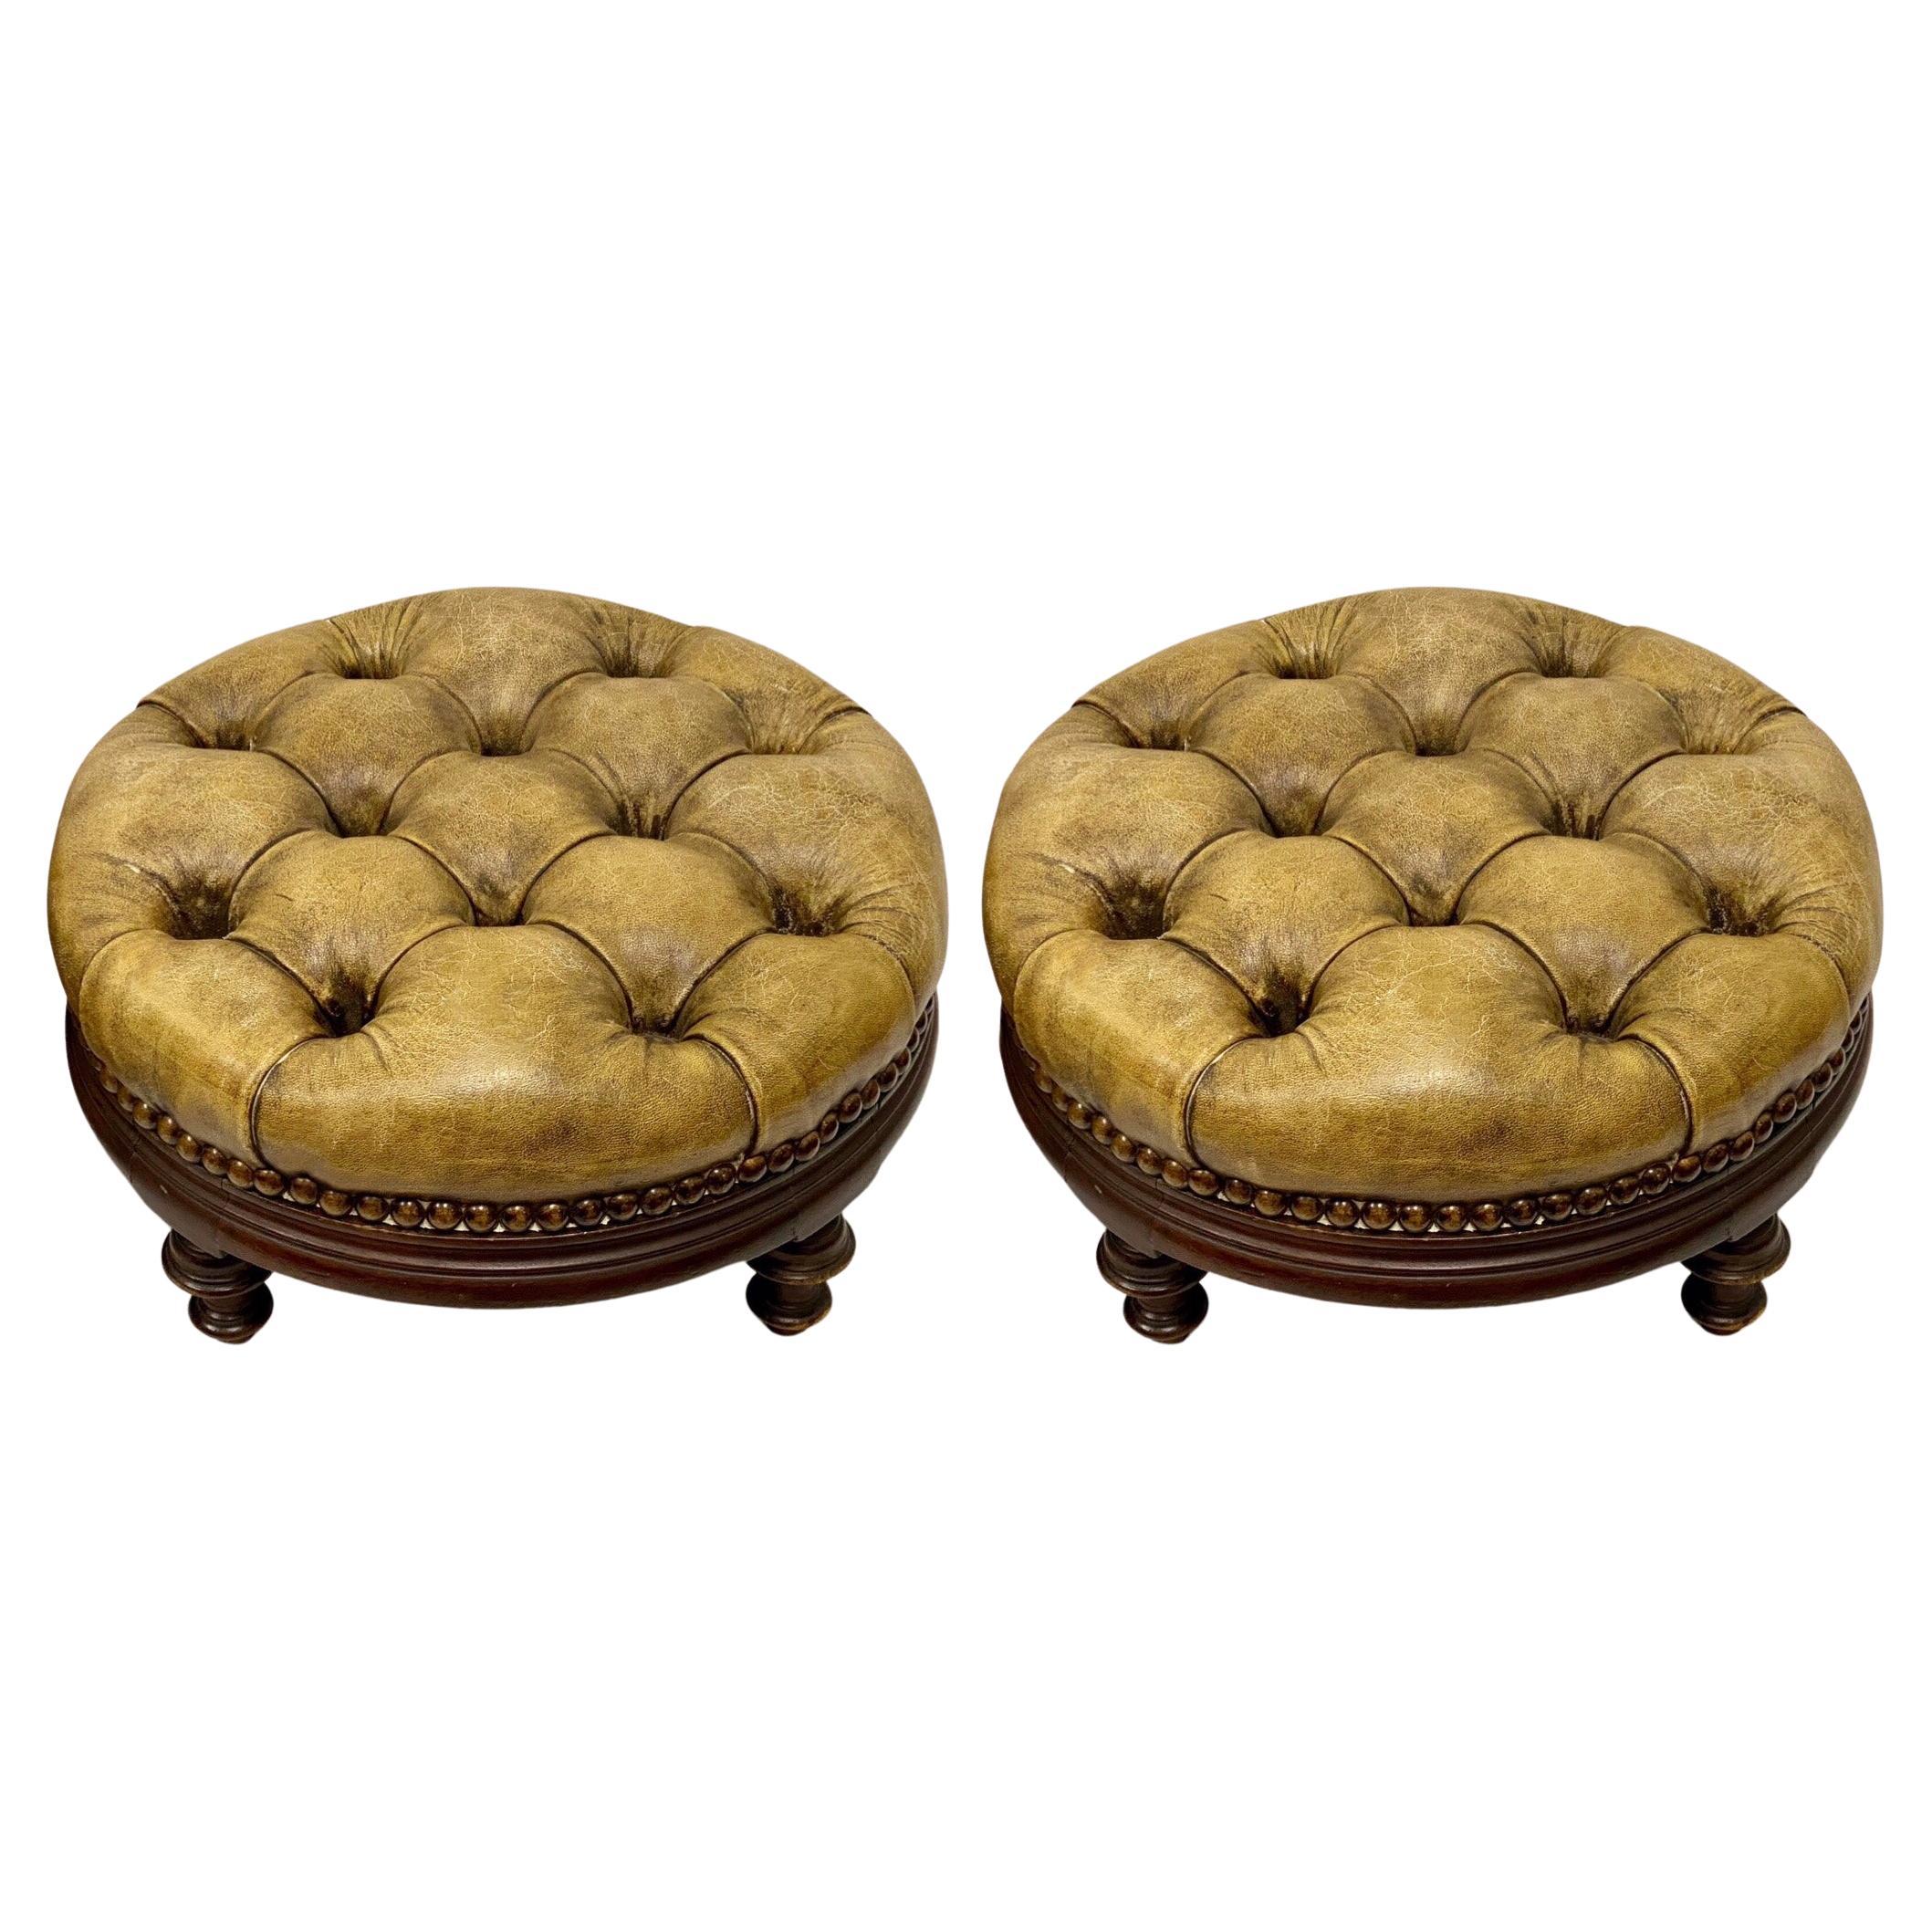 Early English Tufted Gold Leather Chesterfield Ottomans, a Pair For Sale